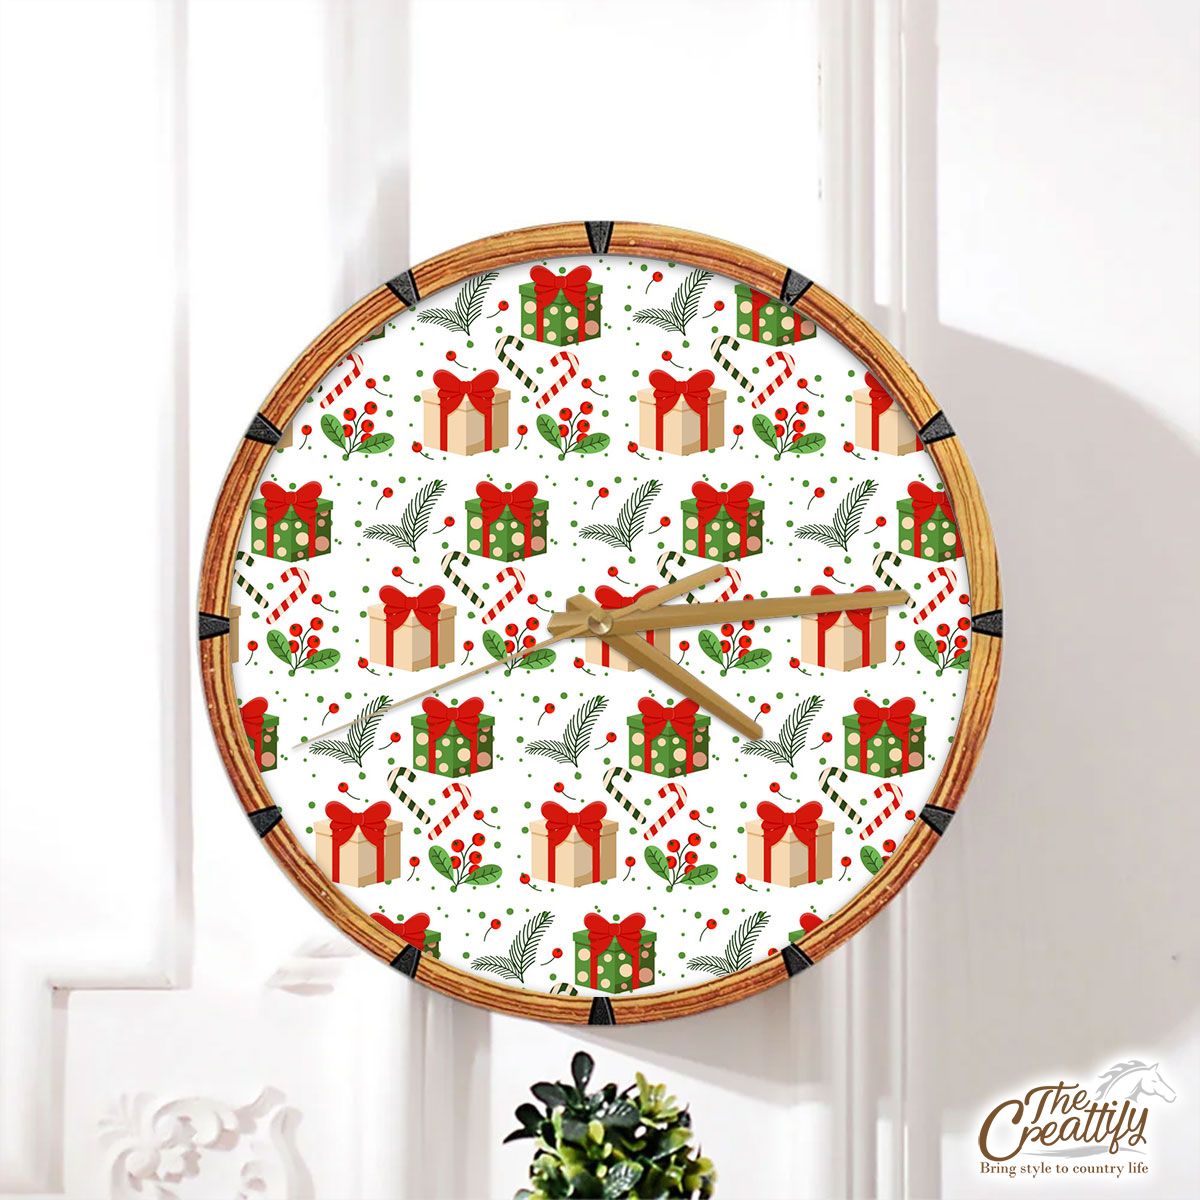 Christmas Gifts And Red Berries Wall Clock